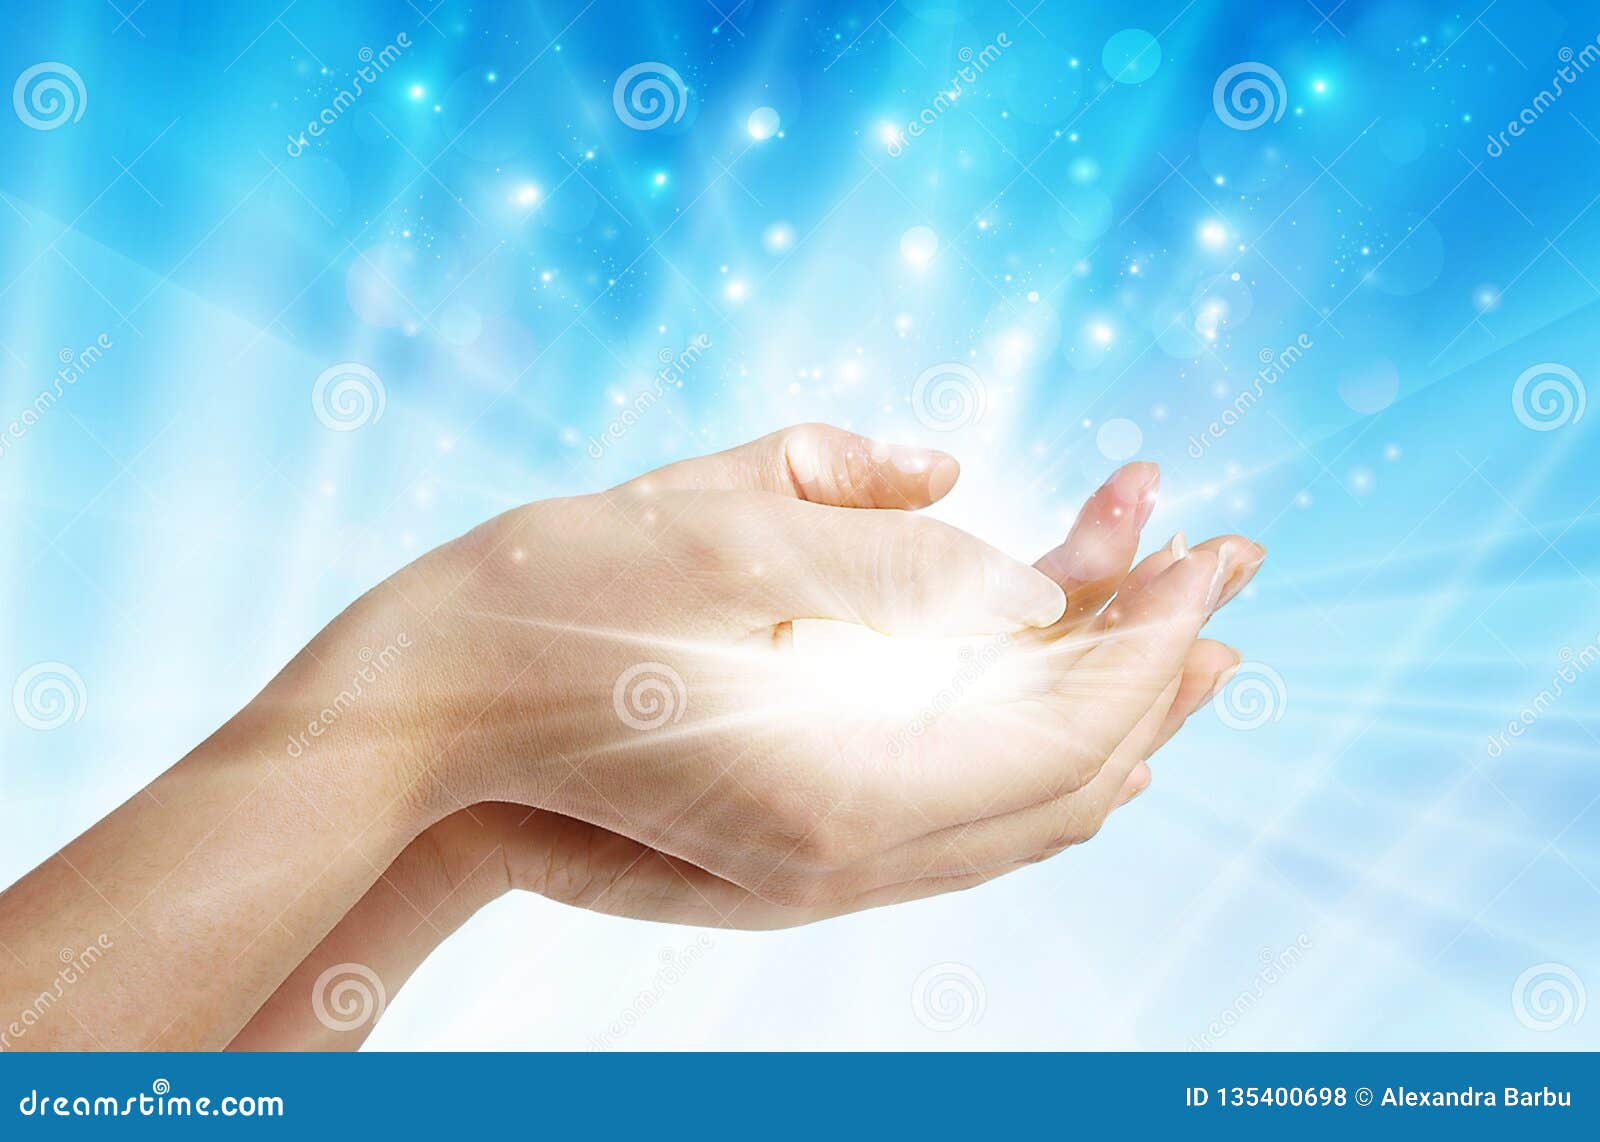 hands with spark of hope, the light of faith background